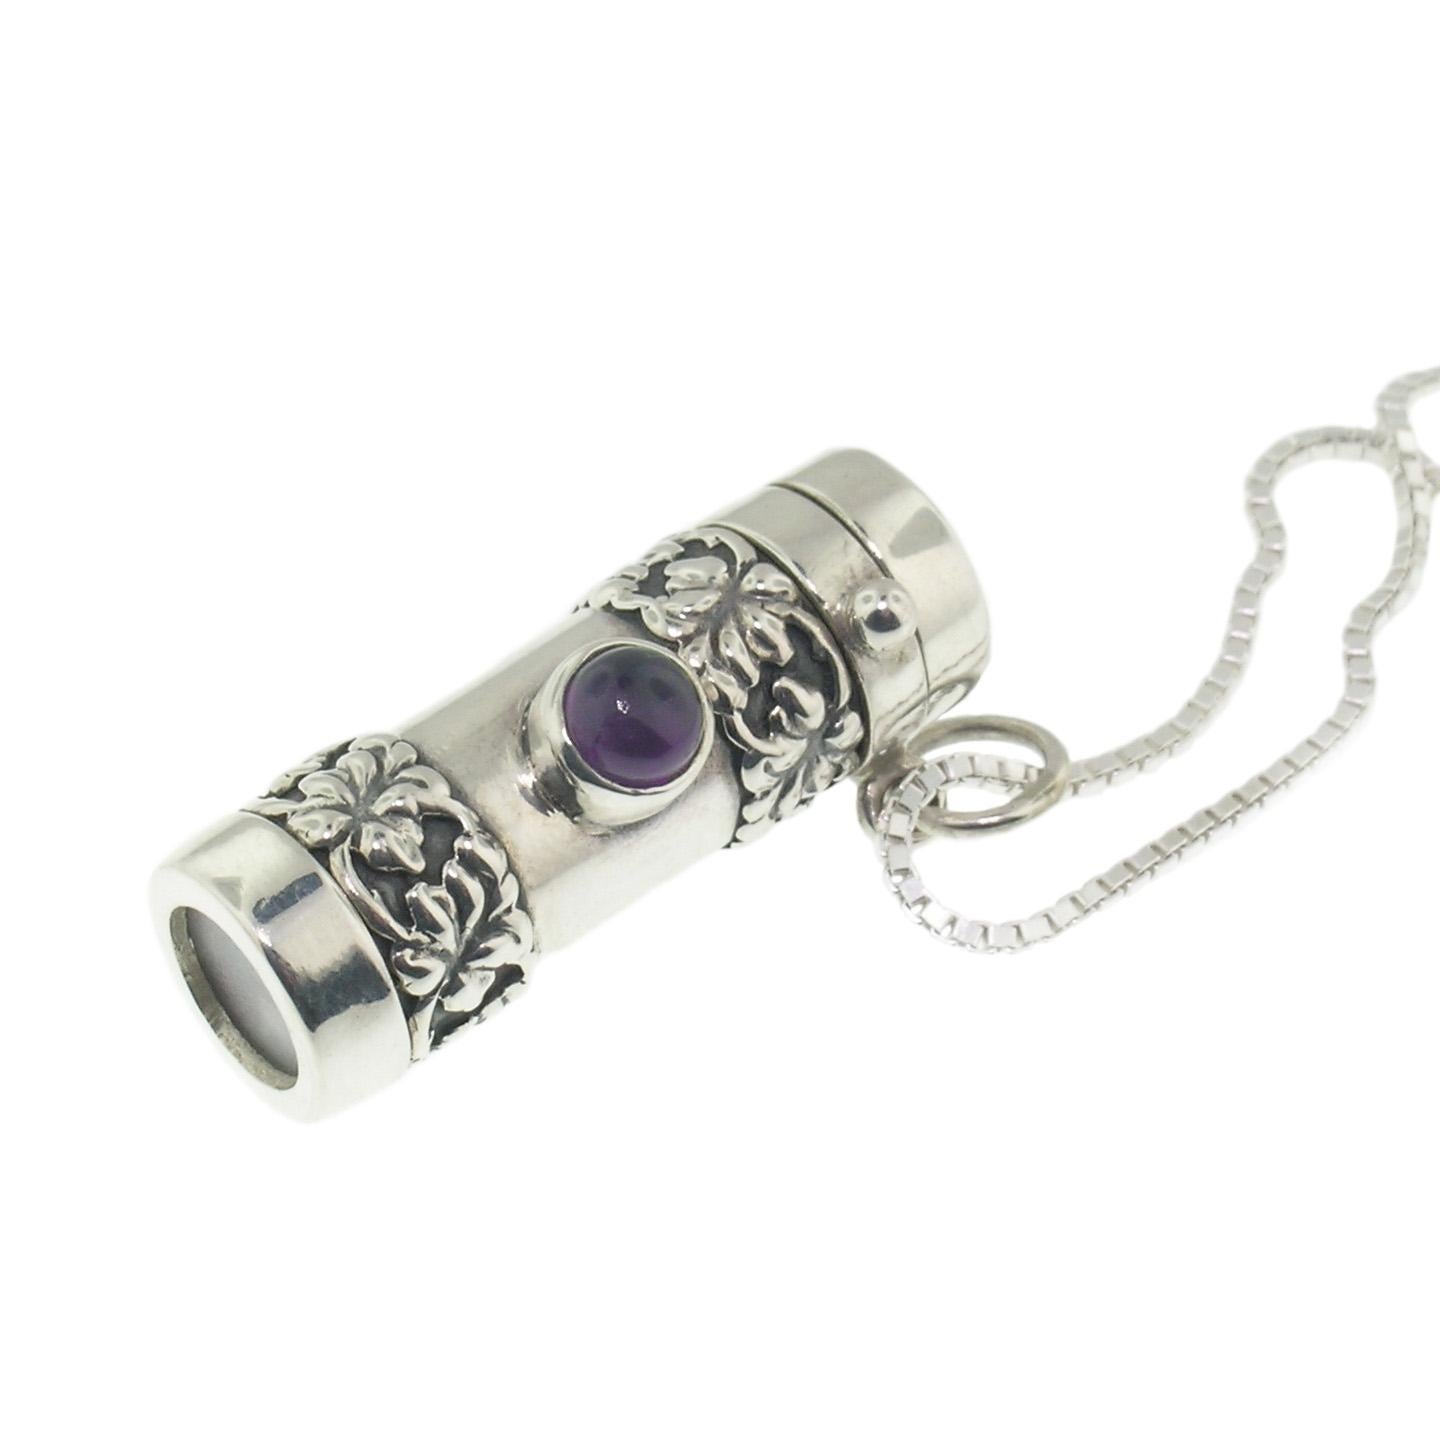 This style of kaleidoscope necklace is clean and elegant, featuring a single bezel-set amethyst cabochon as well as a richly detailed Hibiscus lei motif at either end. The slightly chunky styling of this style has a nice presence.

The optical